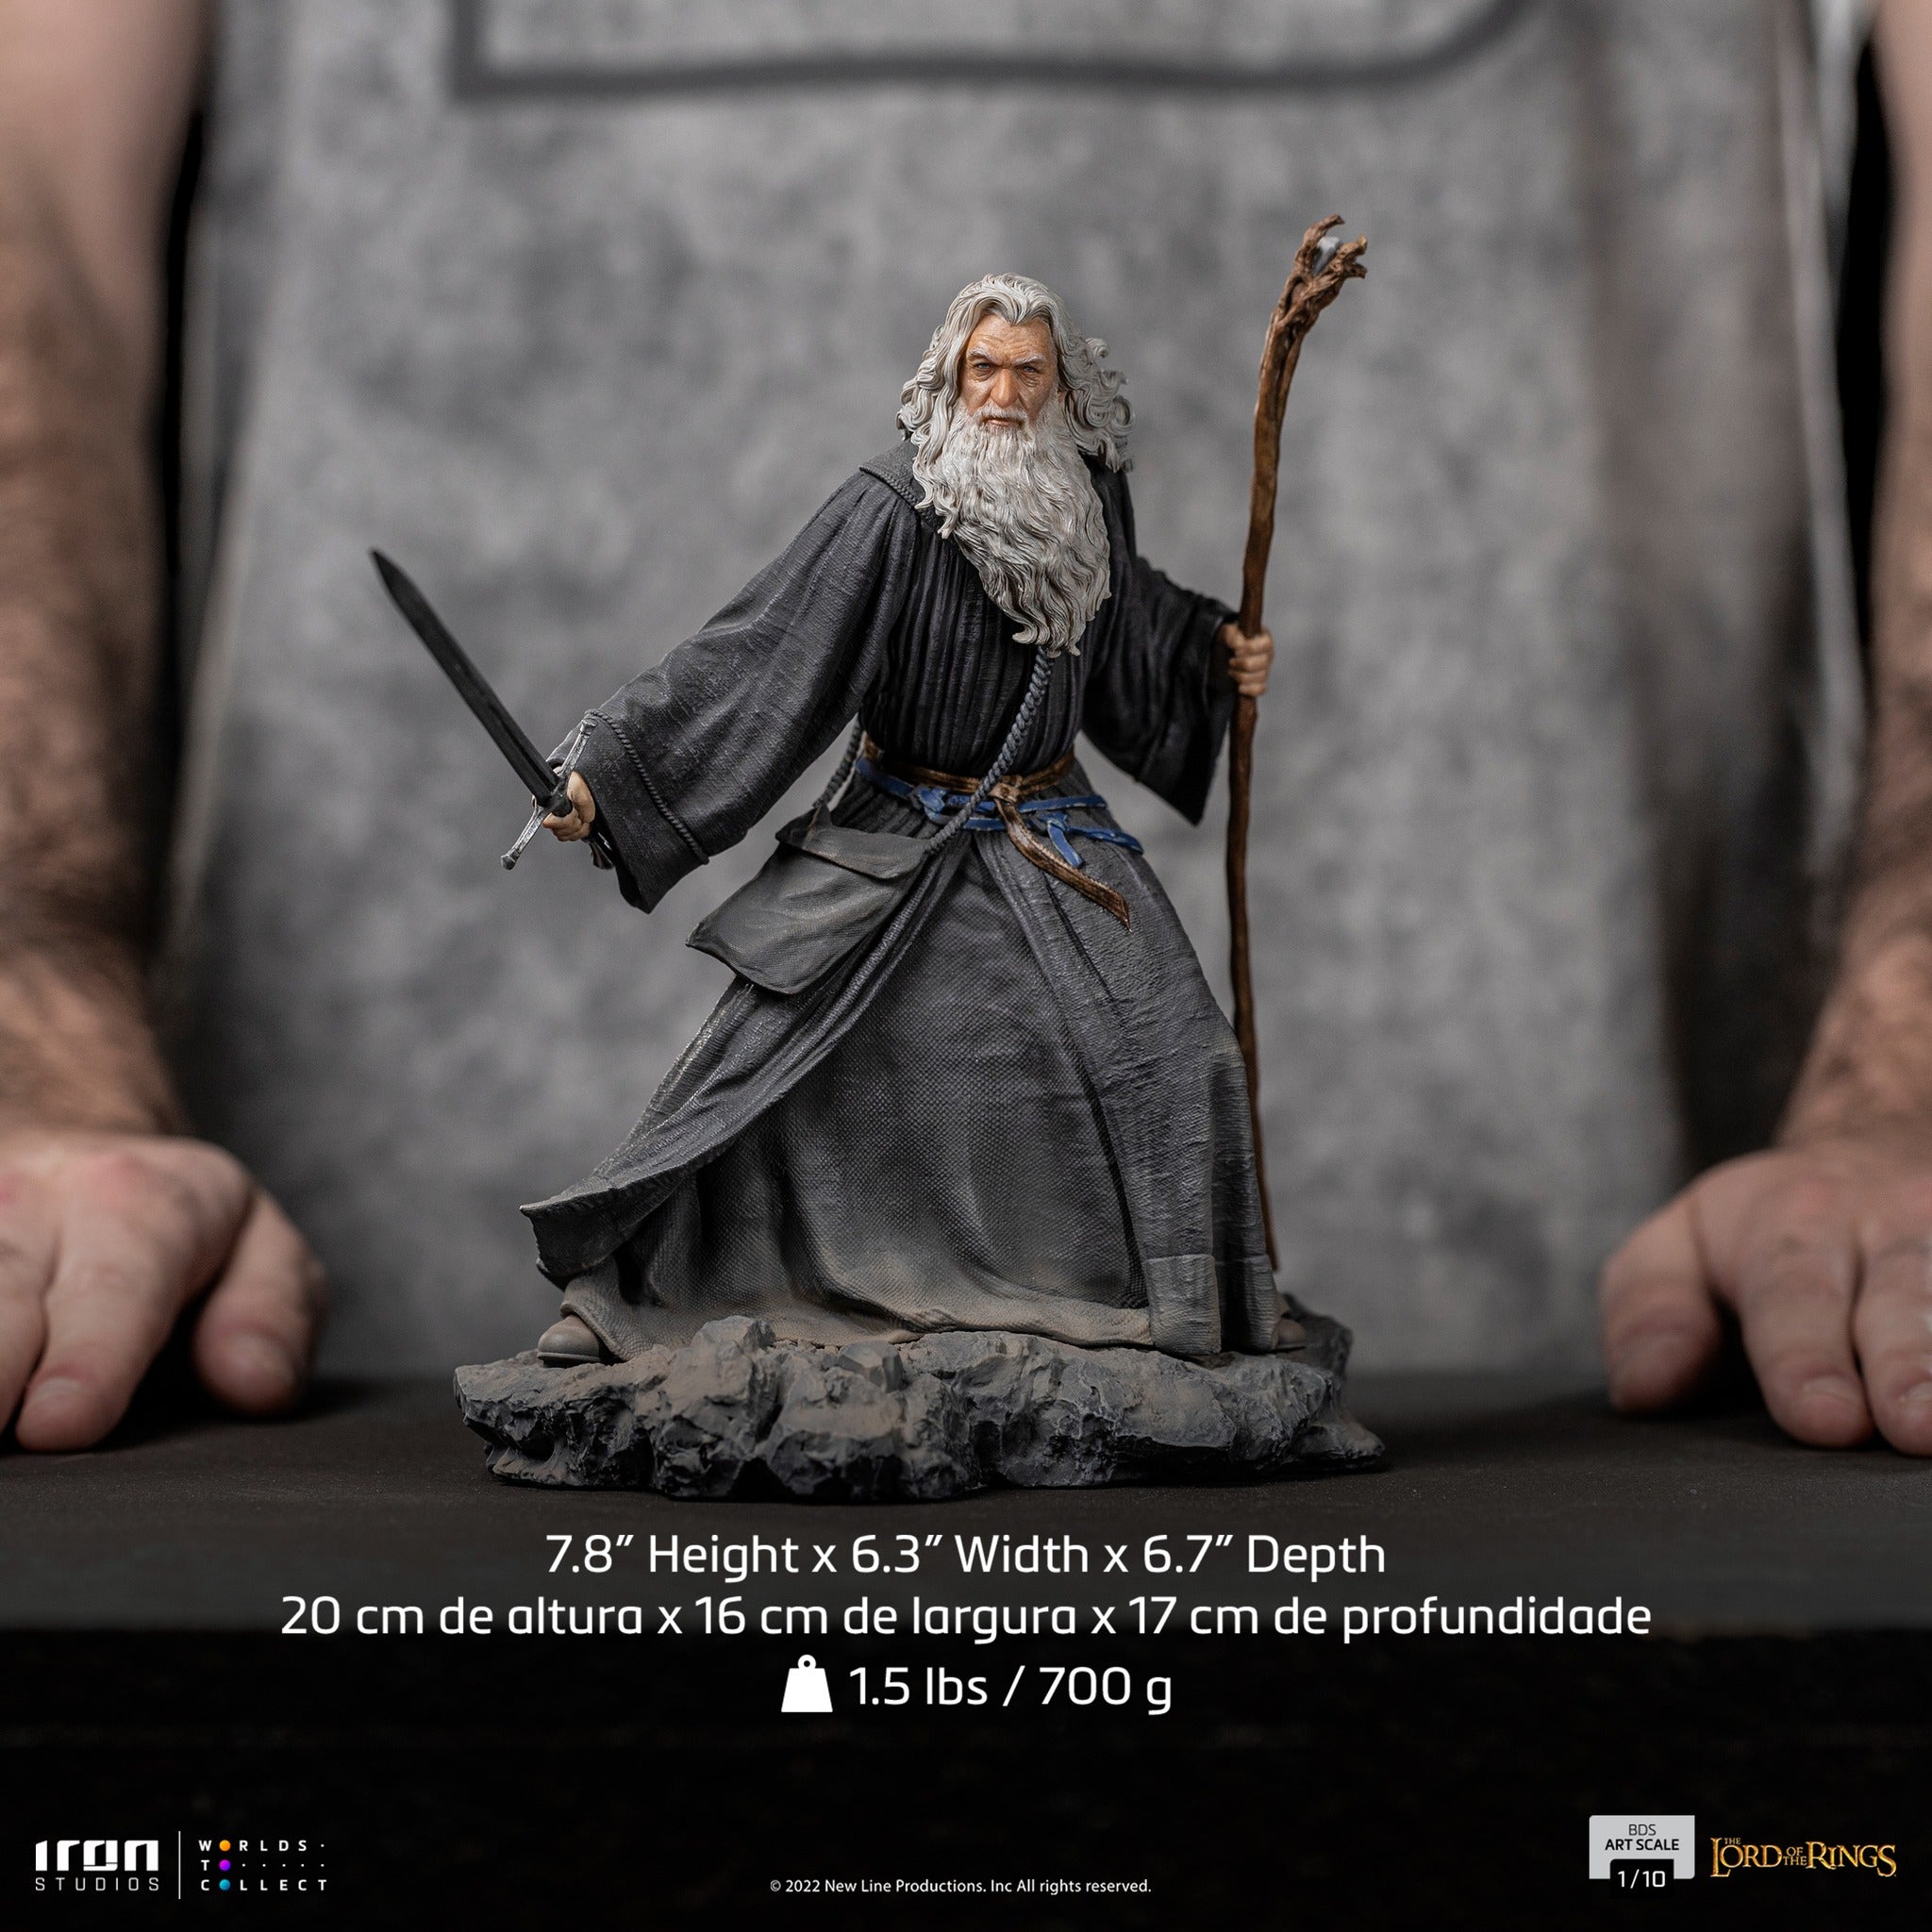 Iron Studios - 1/10 BDS Art Scale - The Lord of the Rings: The Fellowship of the Ring - Gandalf - Marvelous Toys